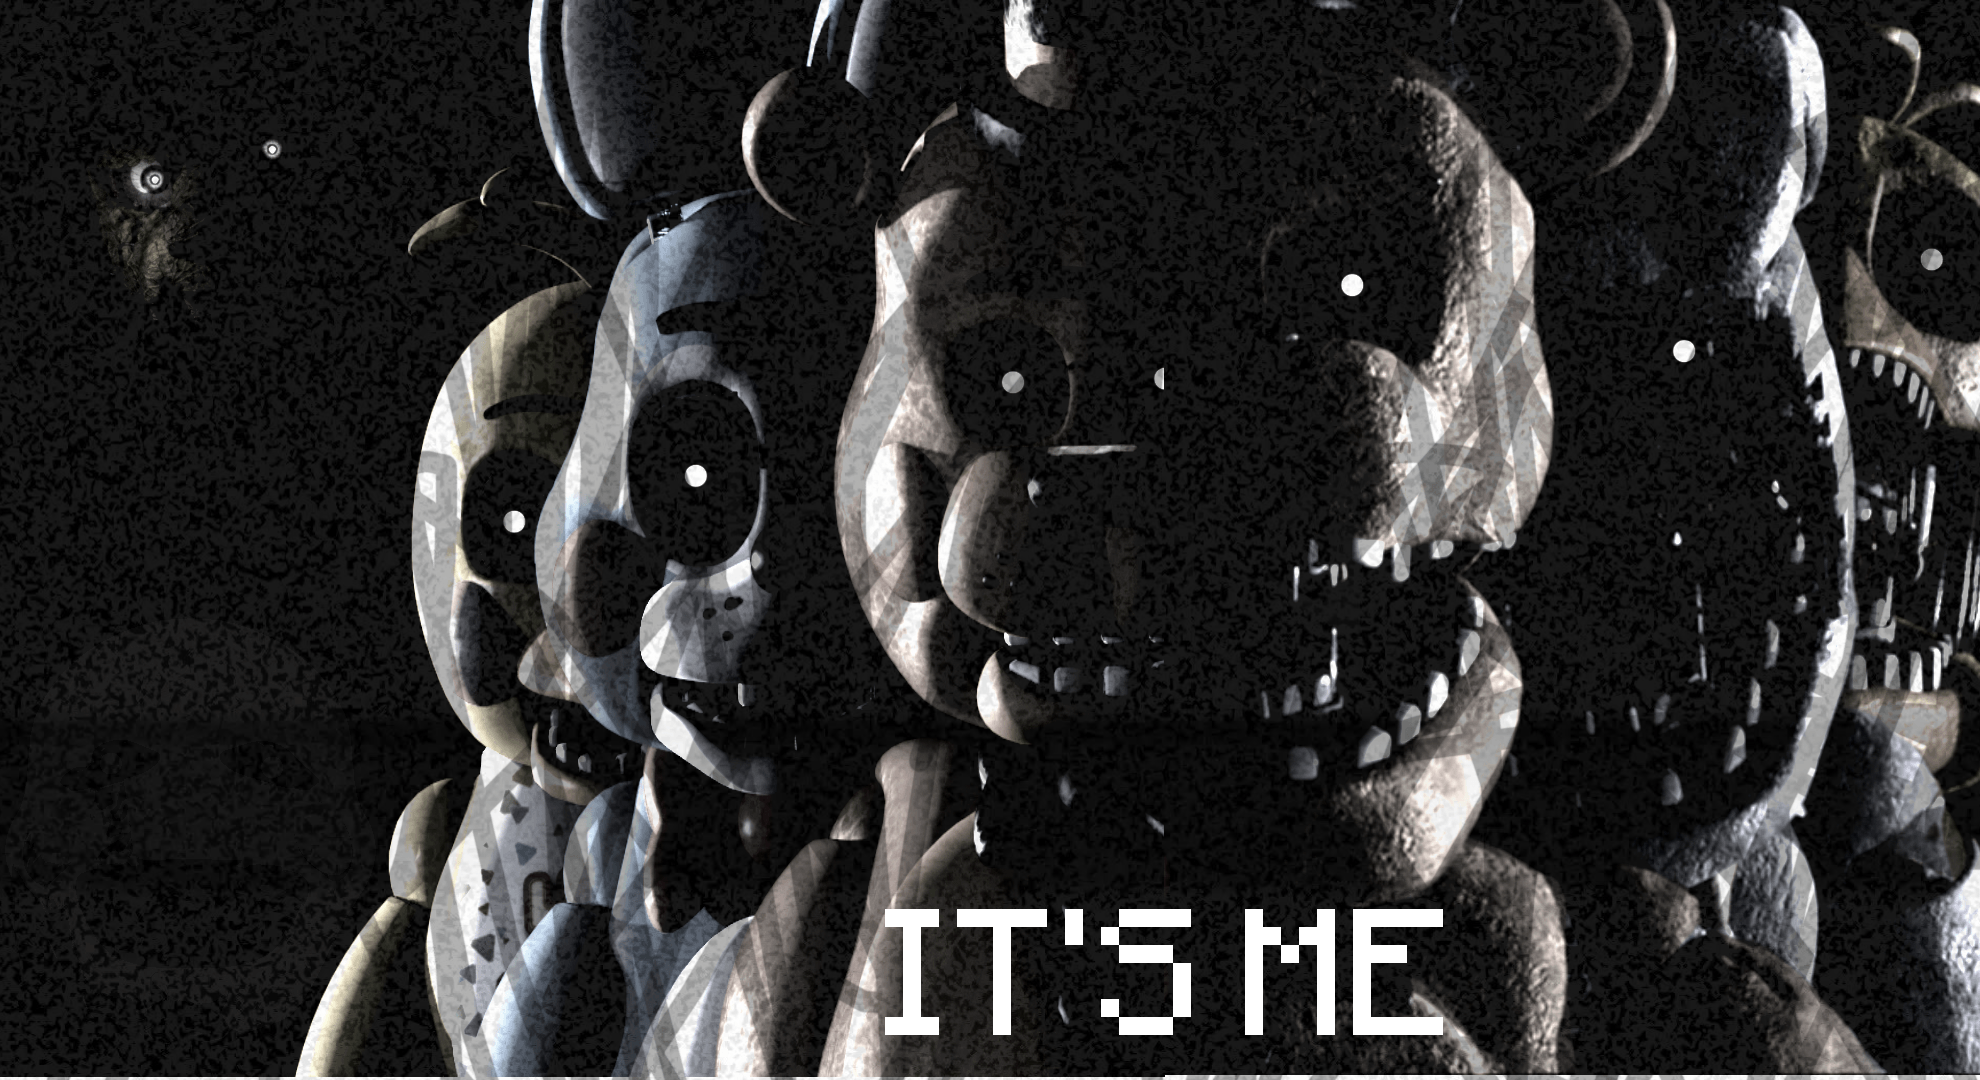 My Own FNAF Wallpaper. You can download it if you'd like